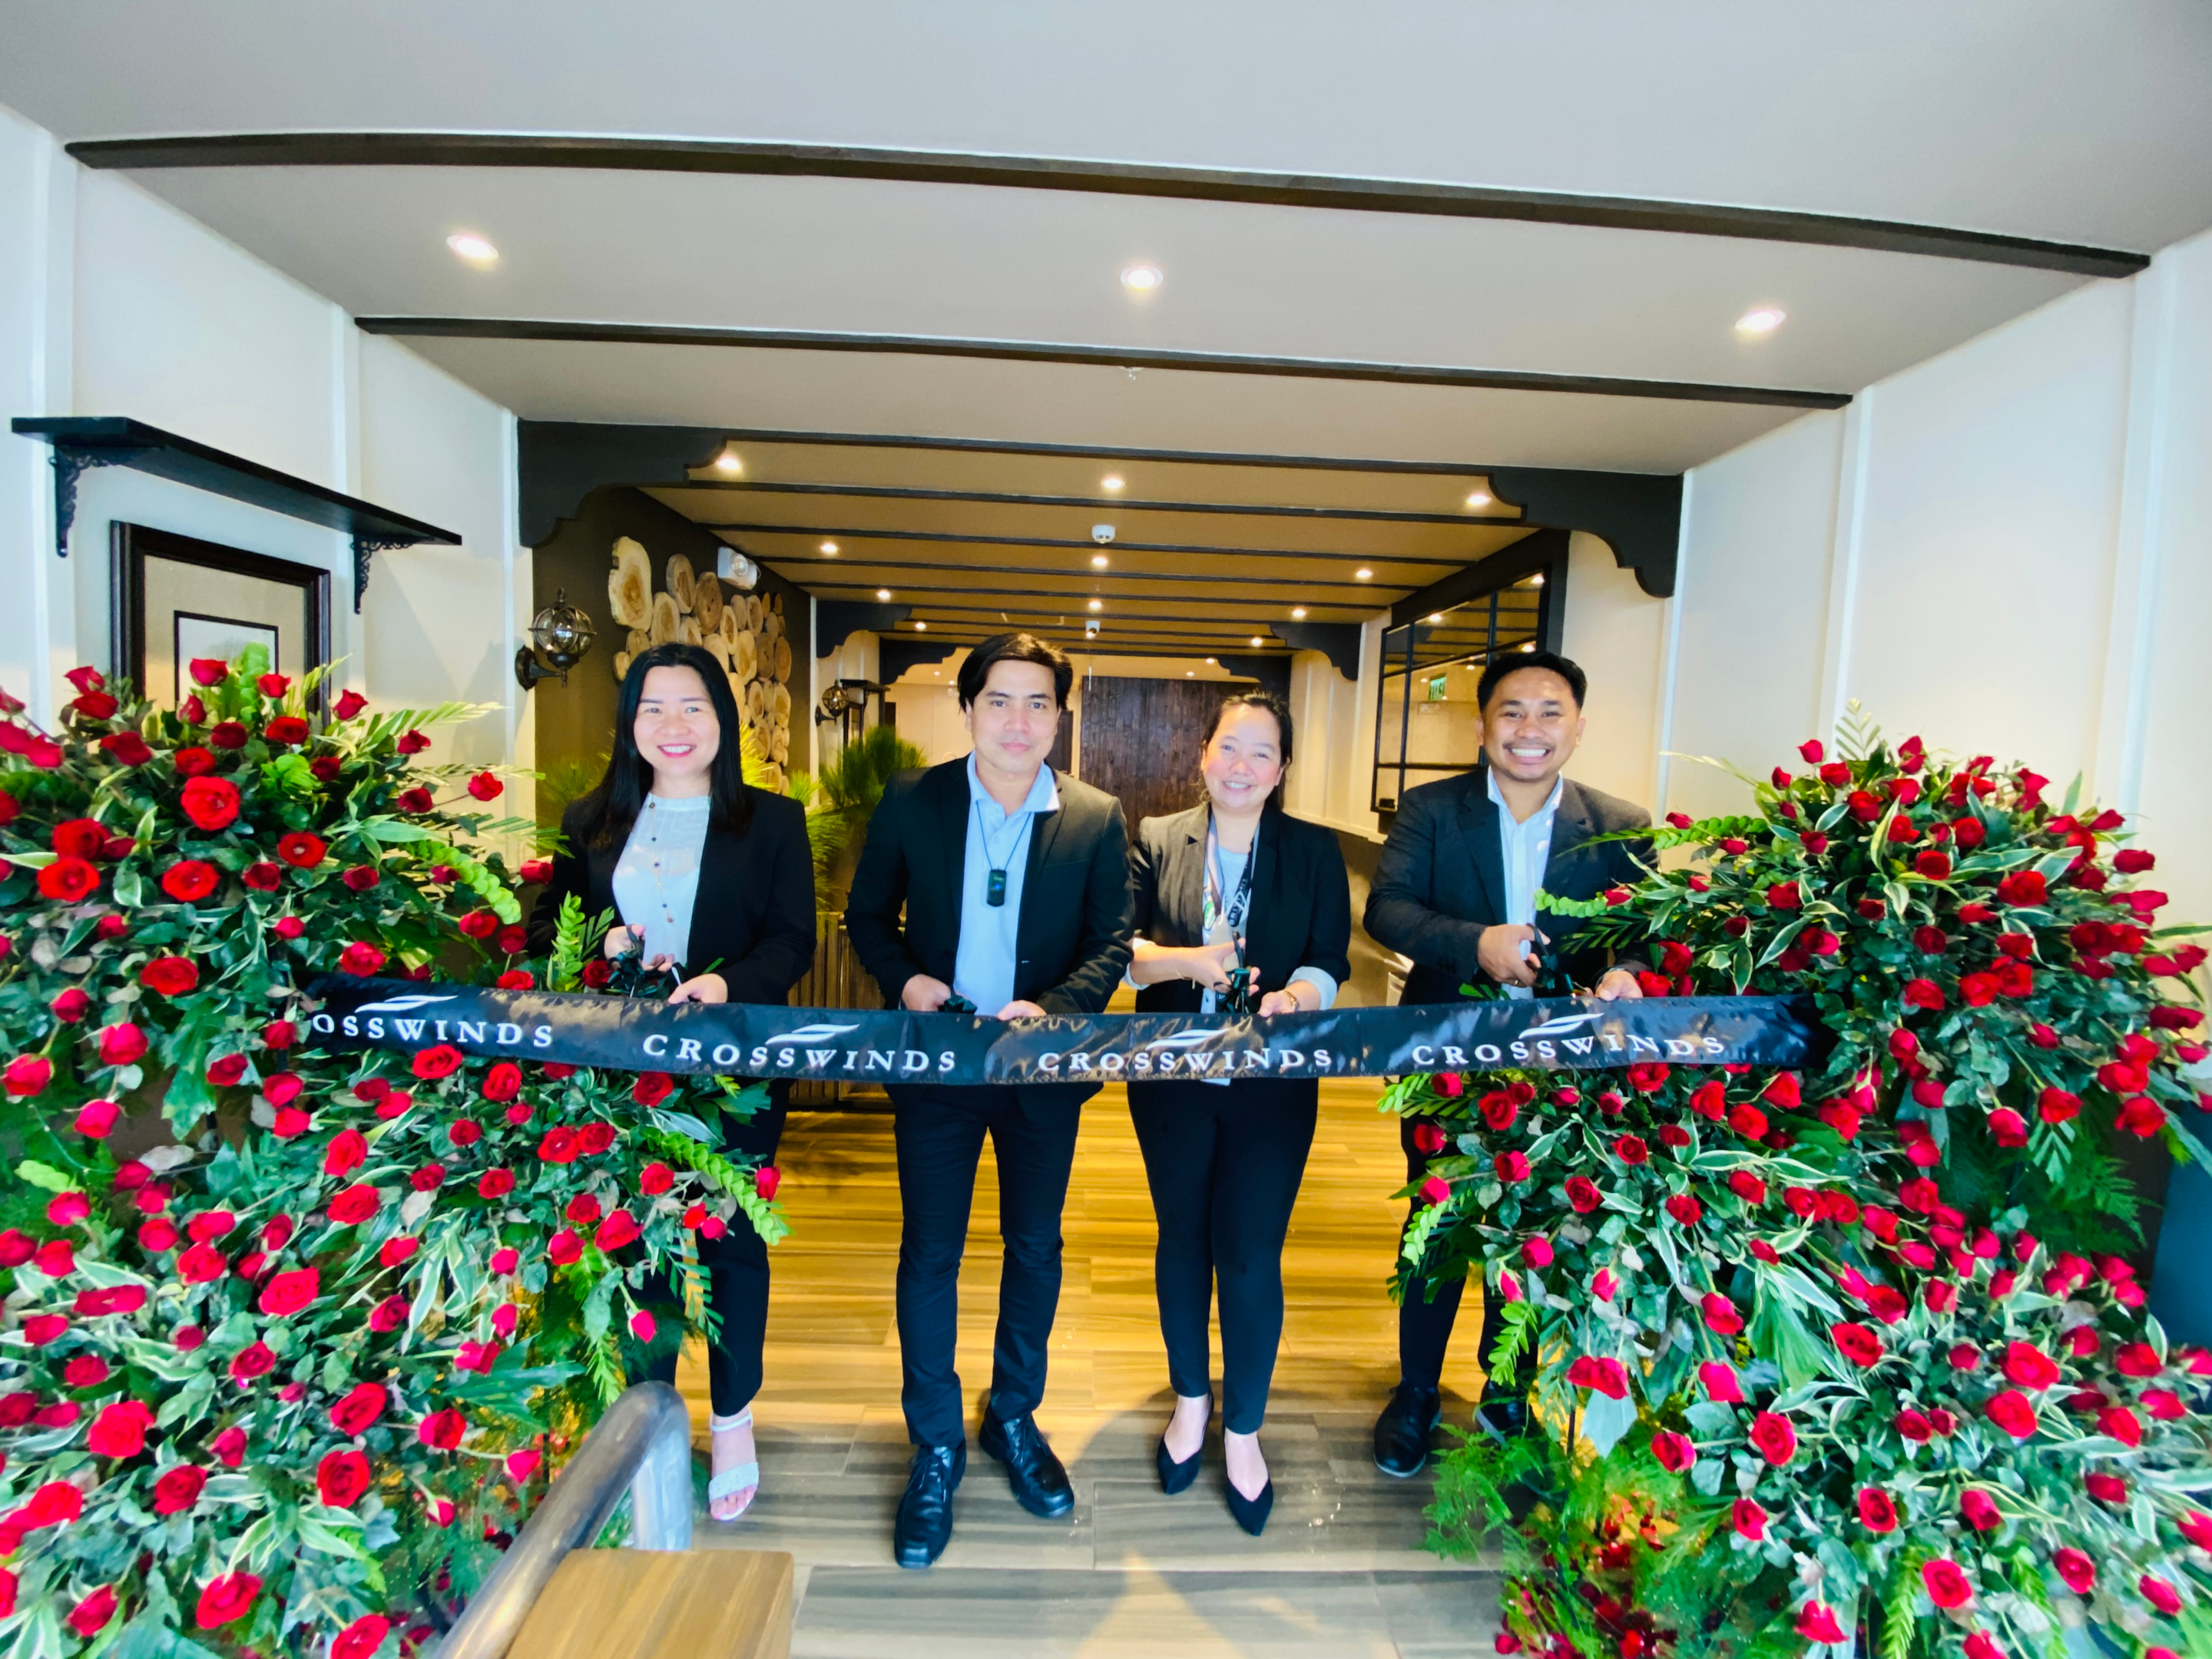 Leading the delivery of Alpine Villas’ first tower, Bernese are Marilyn S. Oblena - Chief Accountant, Earl B. Millares - Operations Head, Mia Rose G. Marasigan - Admin Head, Joshua Ray Q. Cabungan - Sales and Marketing Head